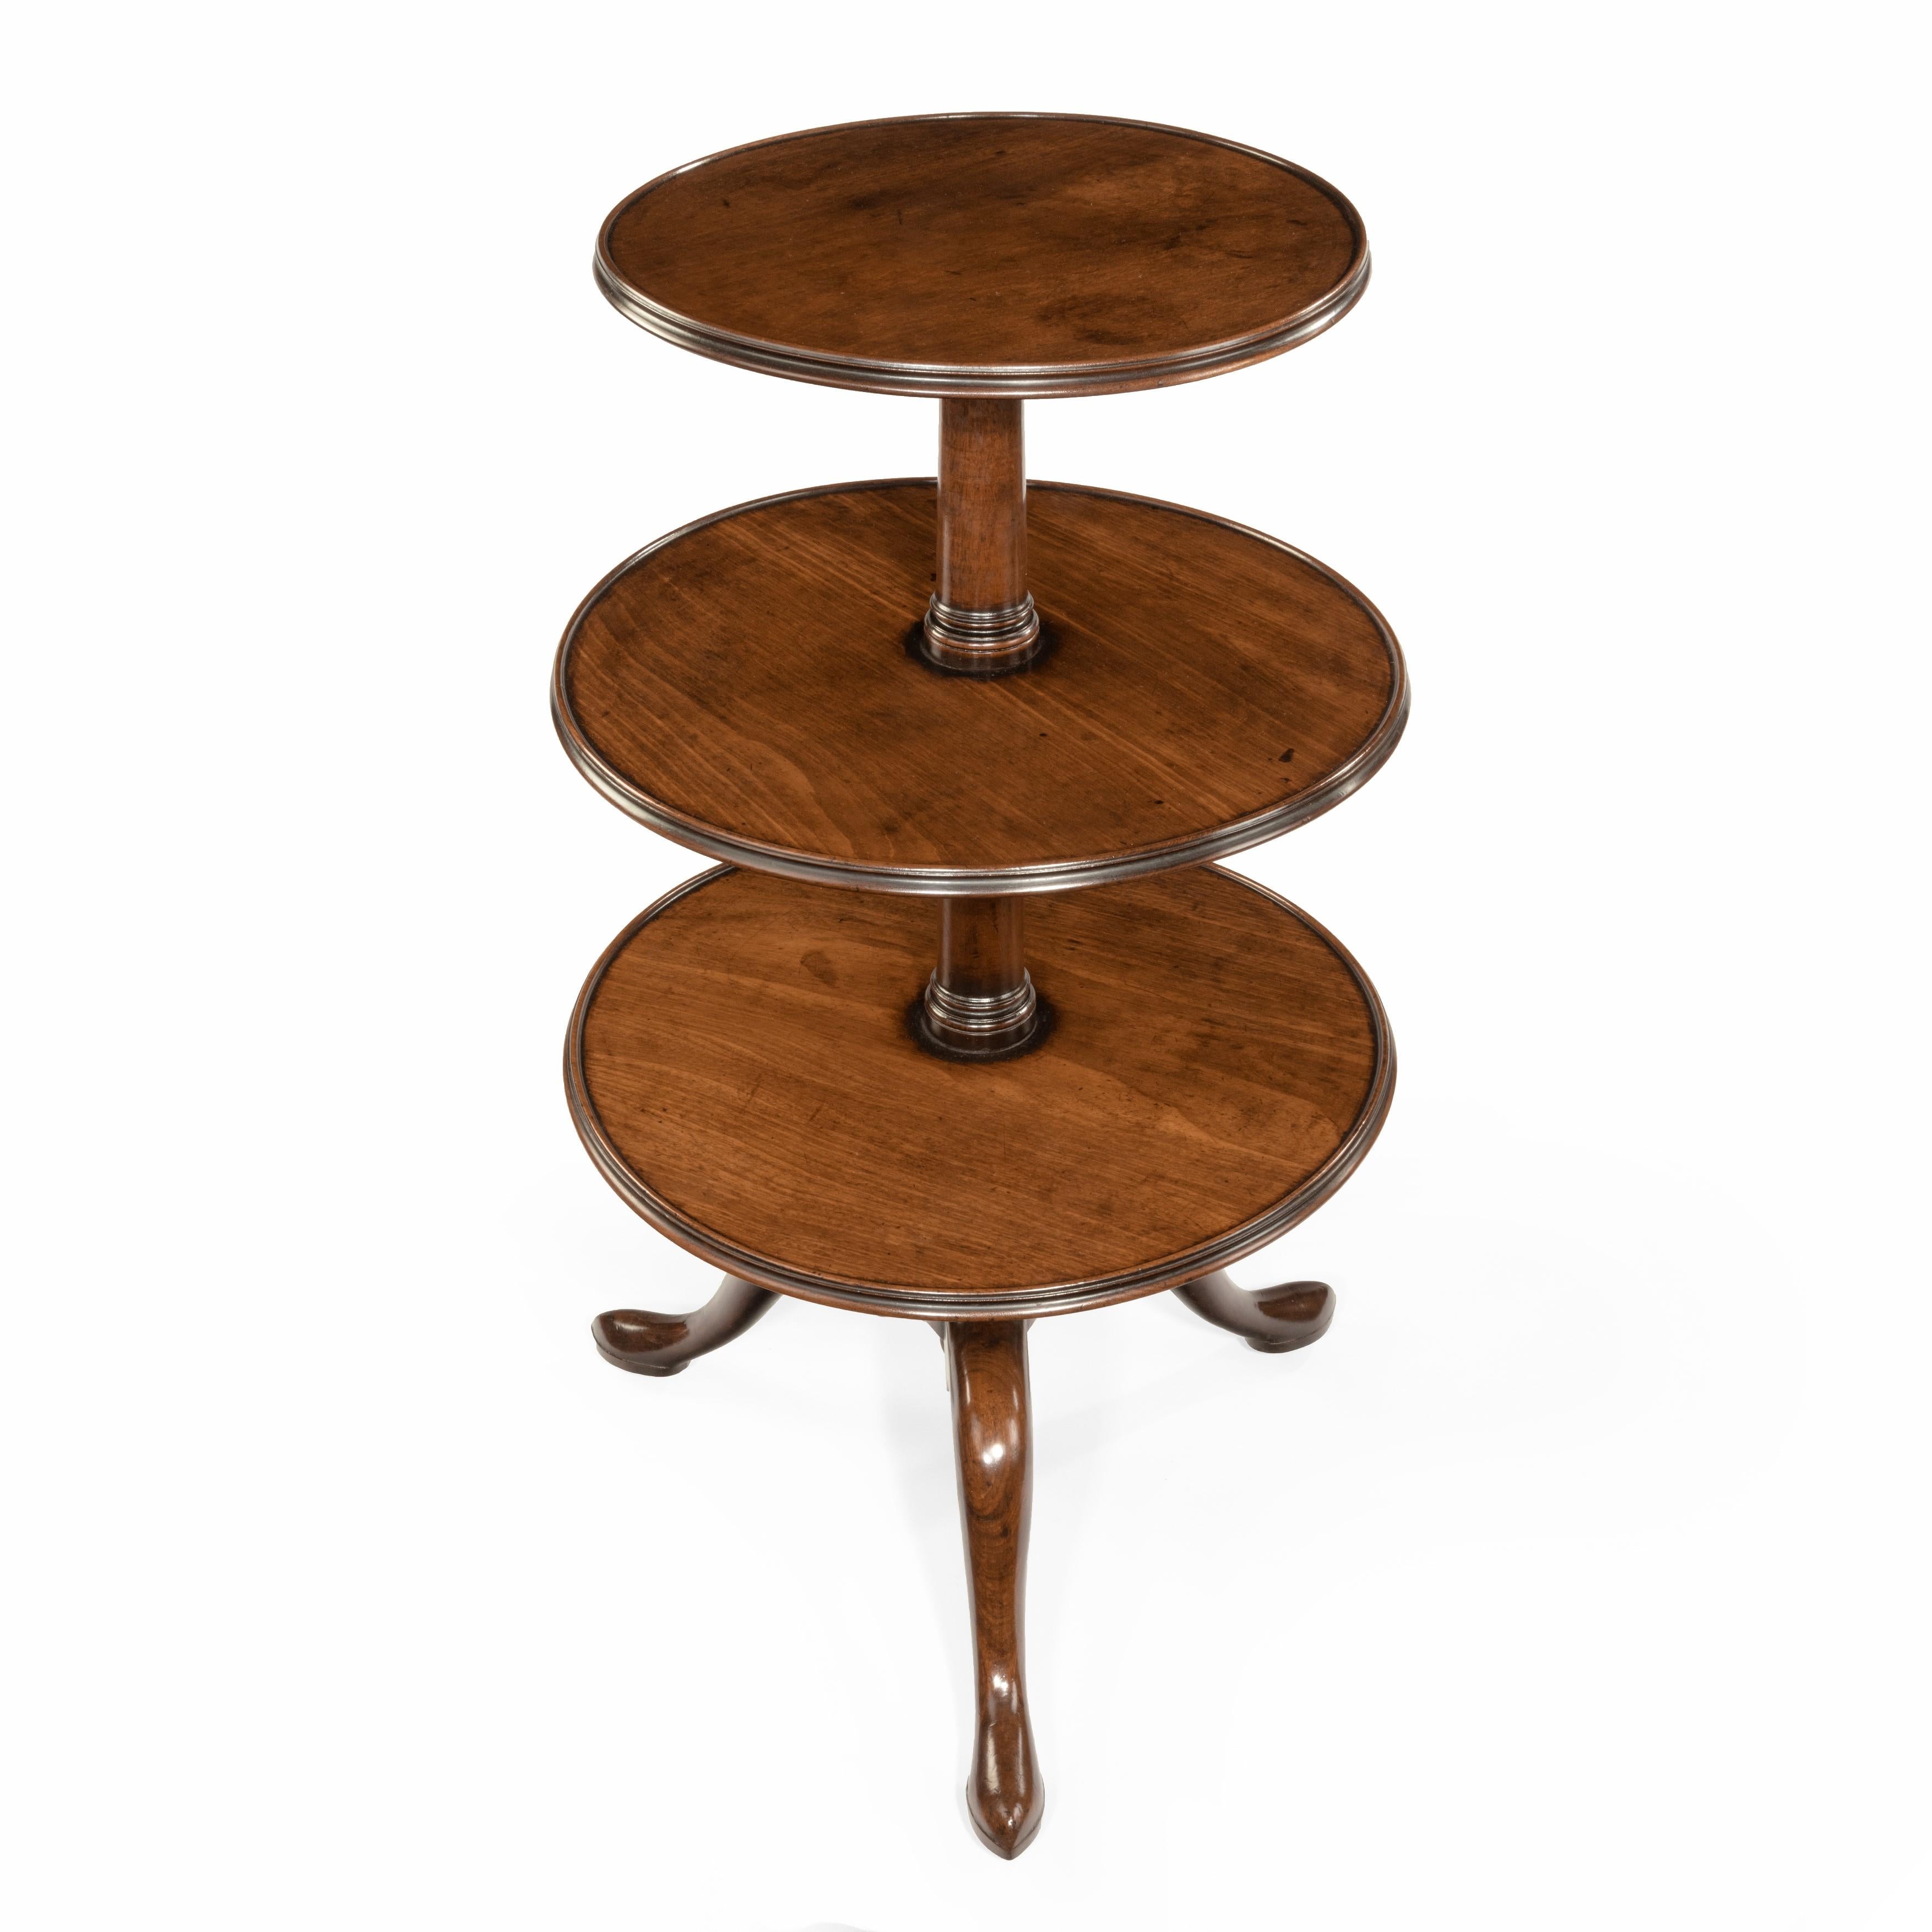 An early George III three-tier mahogany dumb waiter, of typical form with a central tapering support raised on three splayed legs, and three graduated circular shelves. English, circa 1760.
 
Measures: Height 42 inches
Top tier 18 inches in